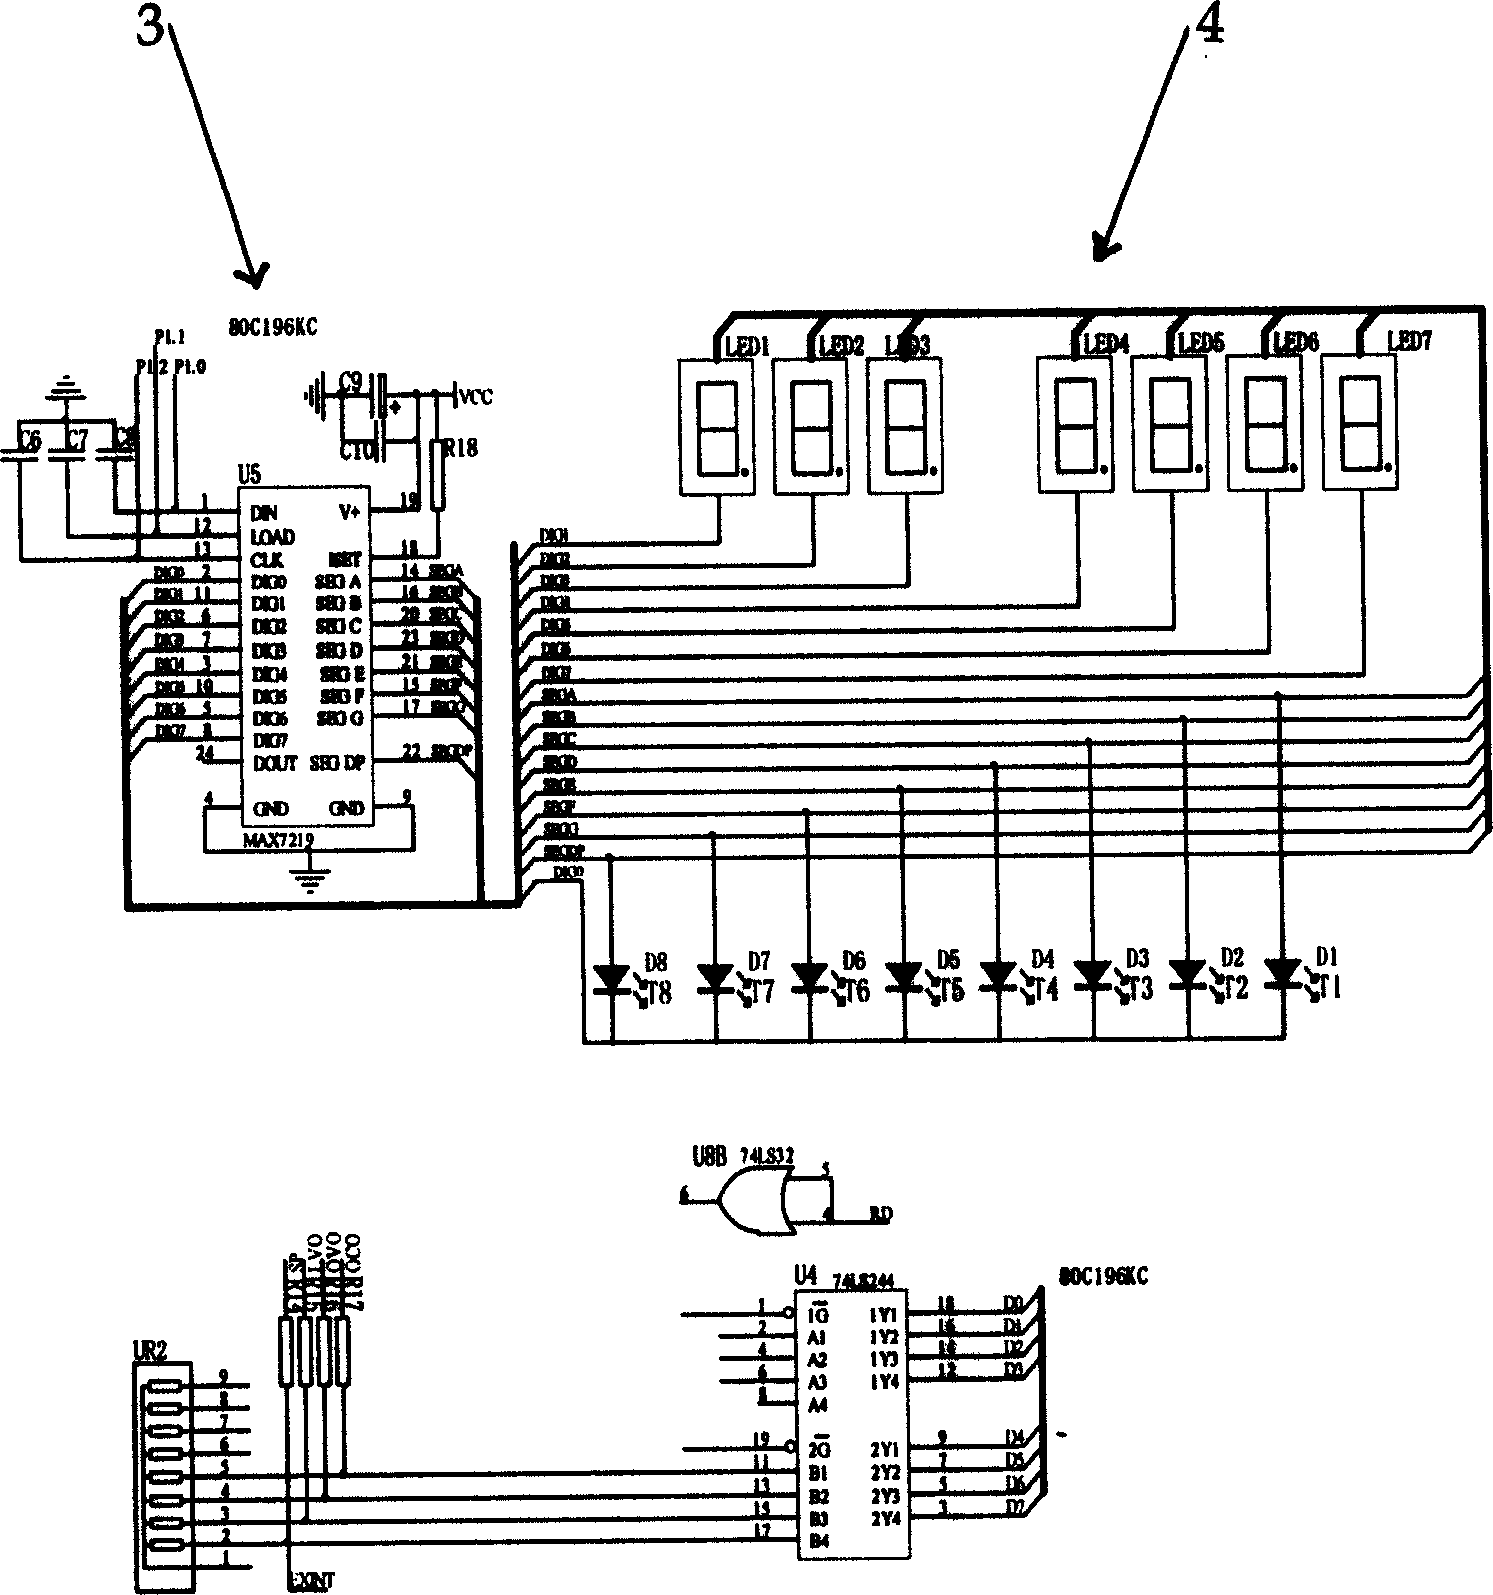 Welding machine fault detecting and protecting system, and its method